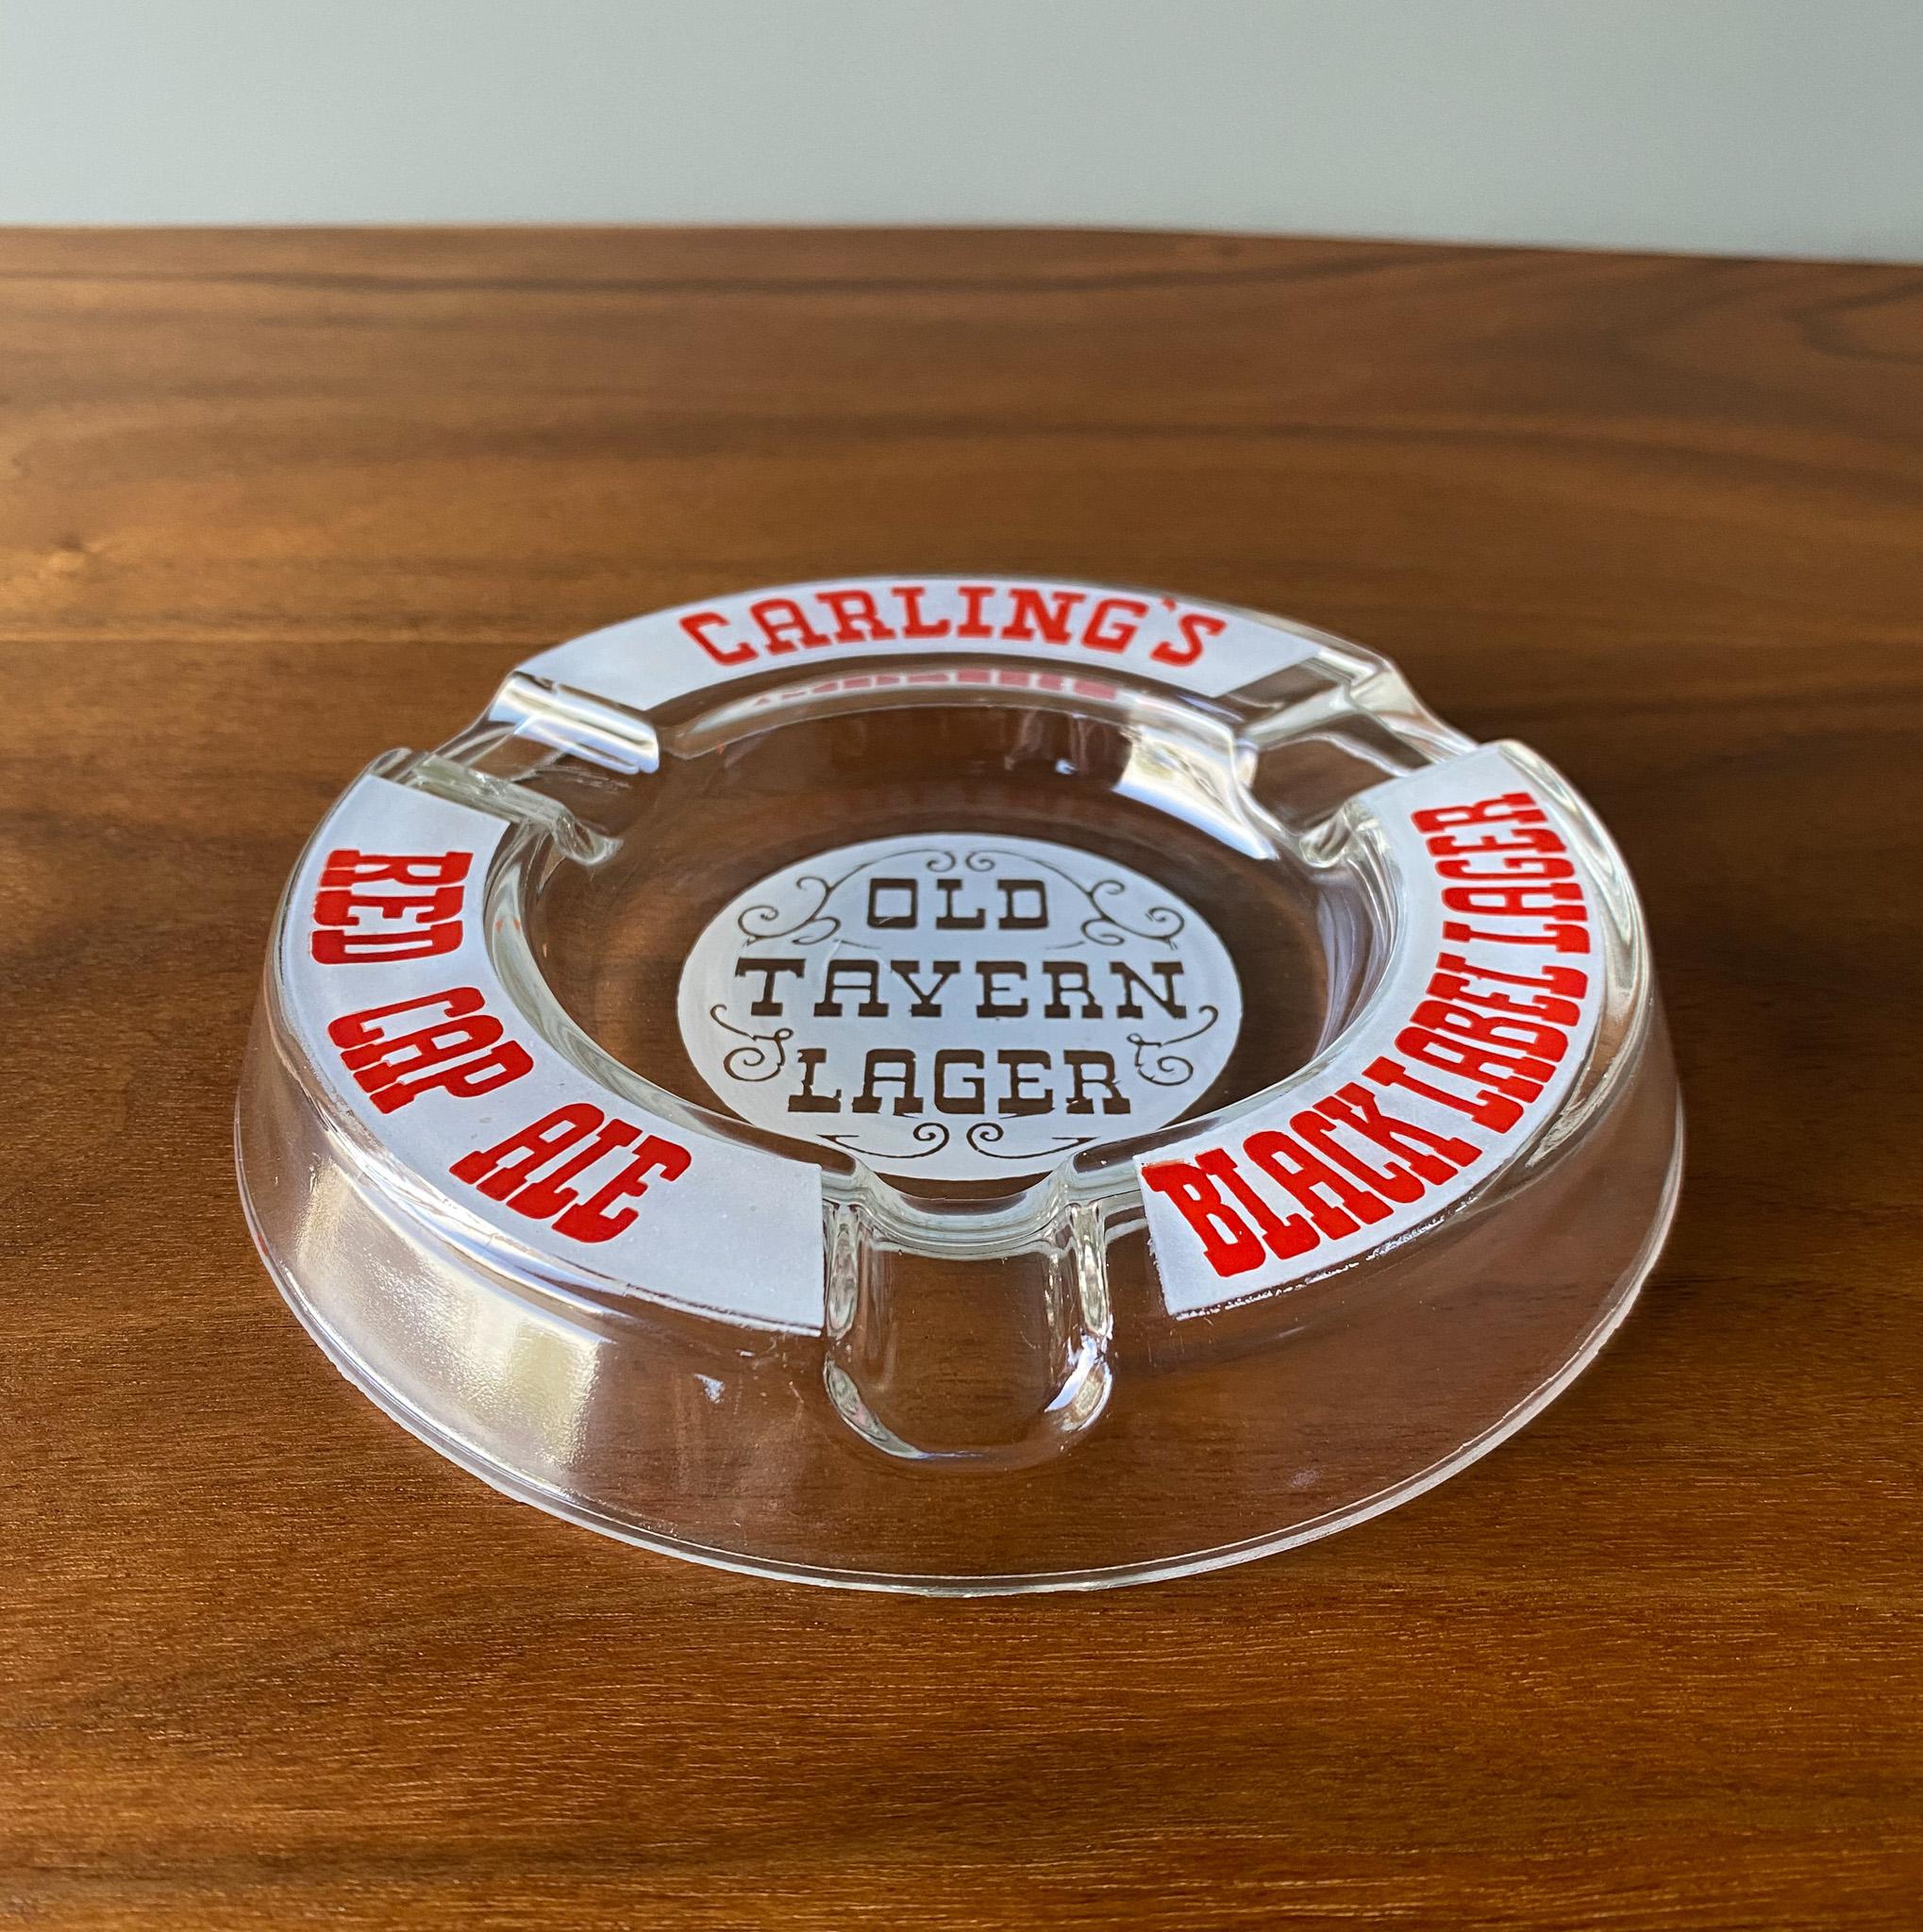 Vintage Carling's Old Tavern Lager Glass Ashtray, USA, 1960's. 